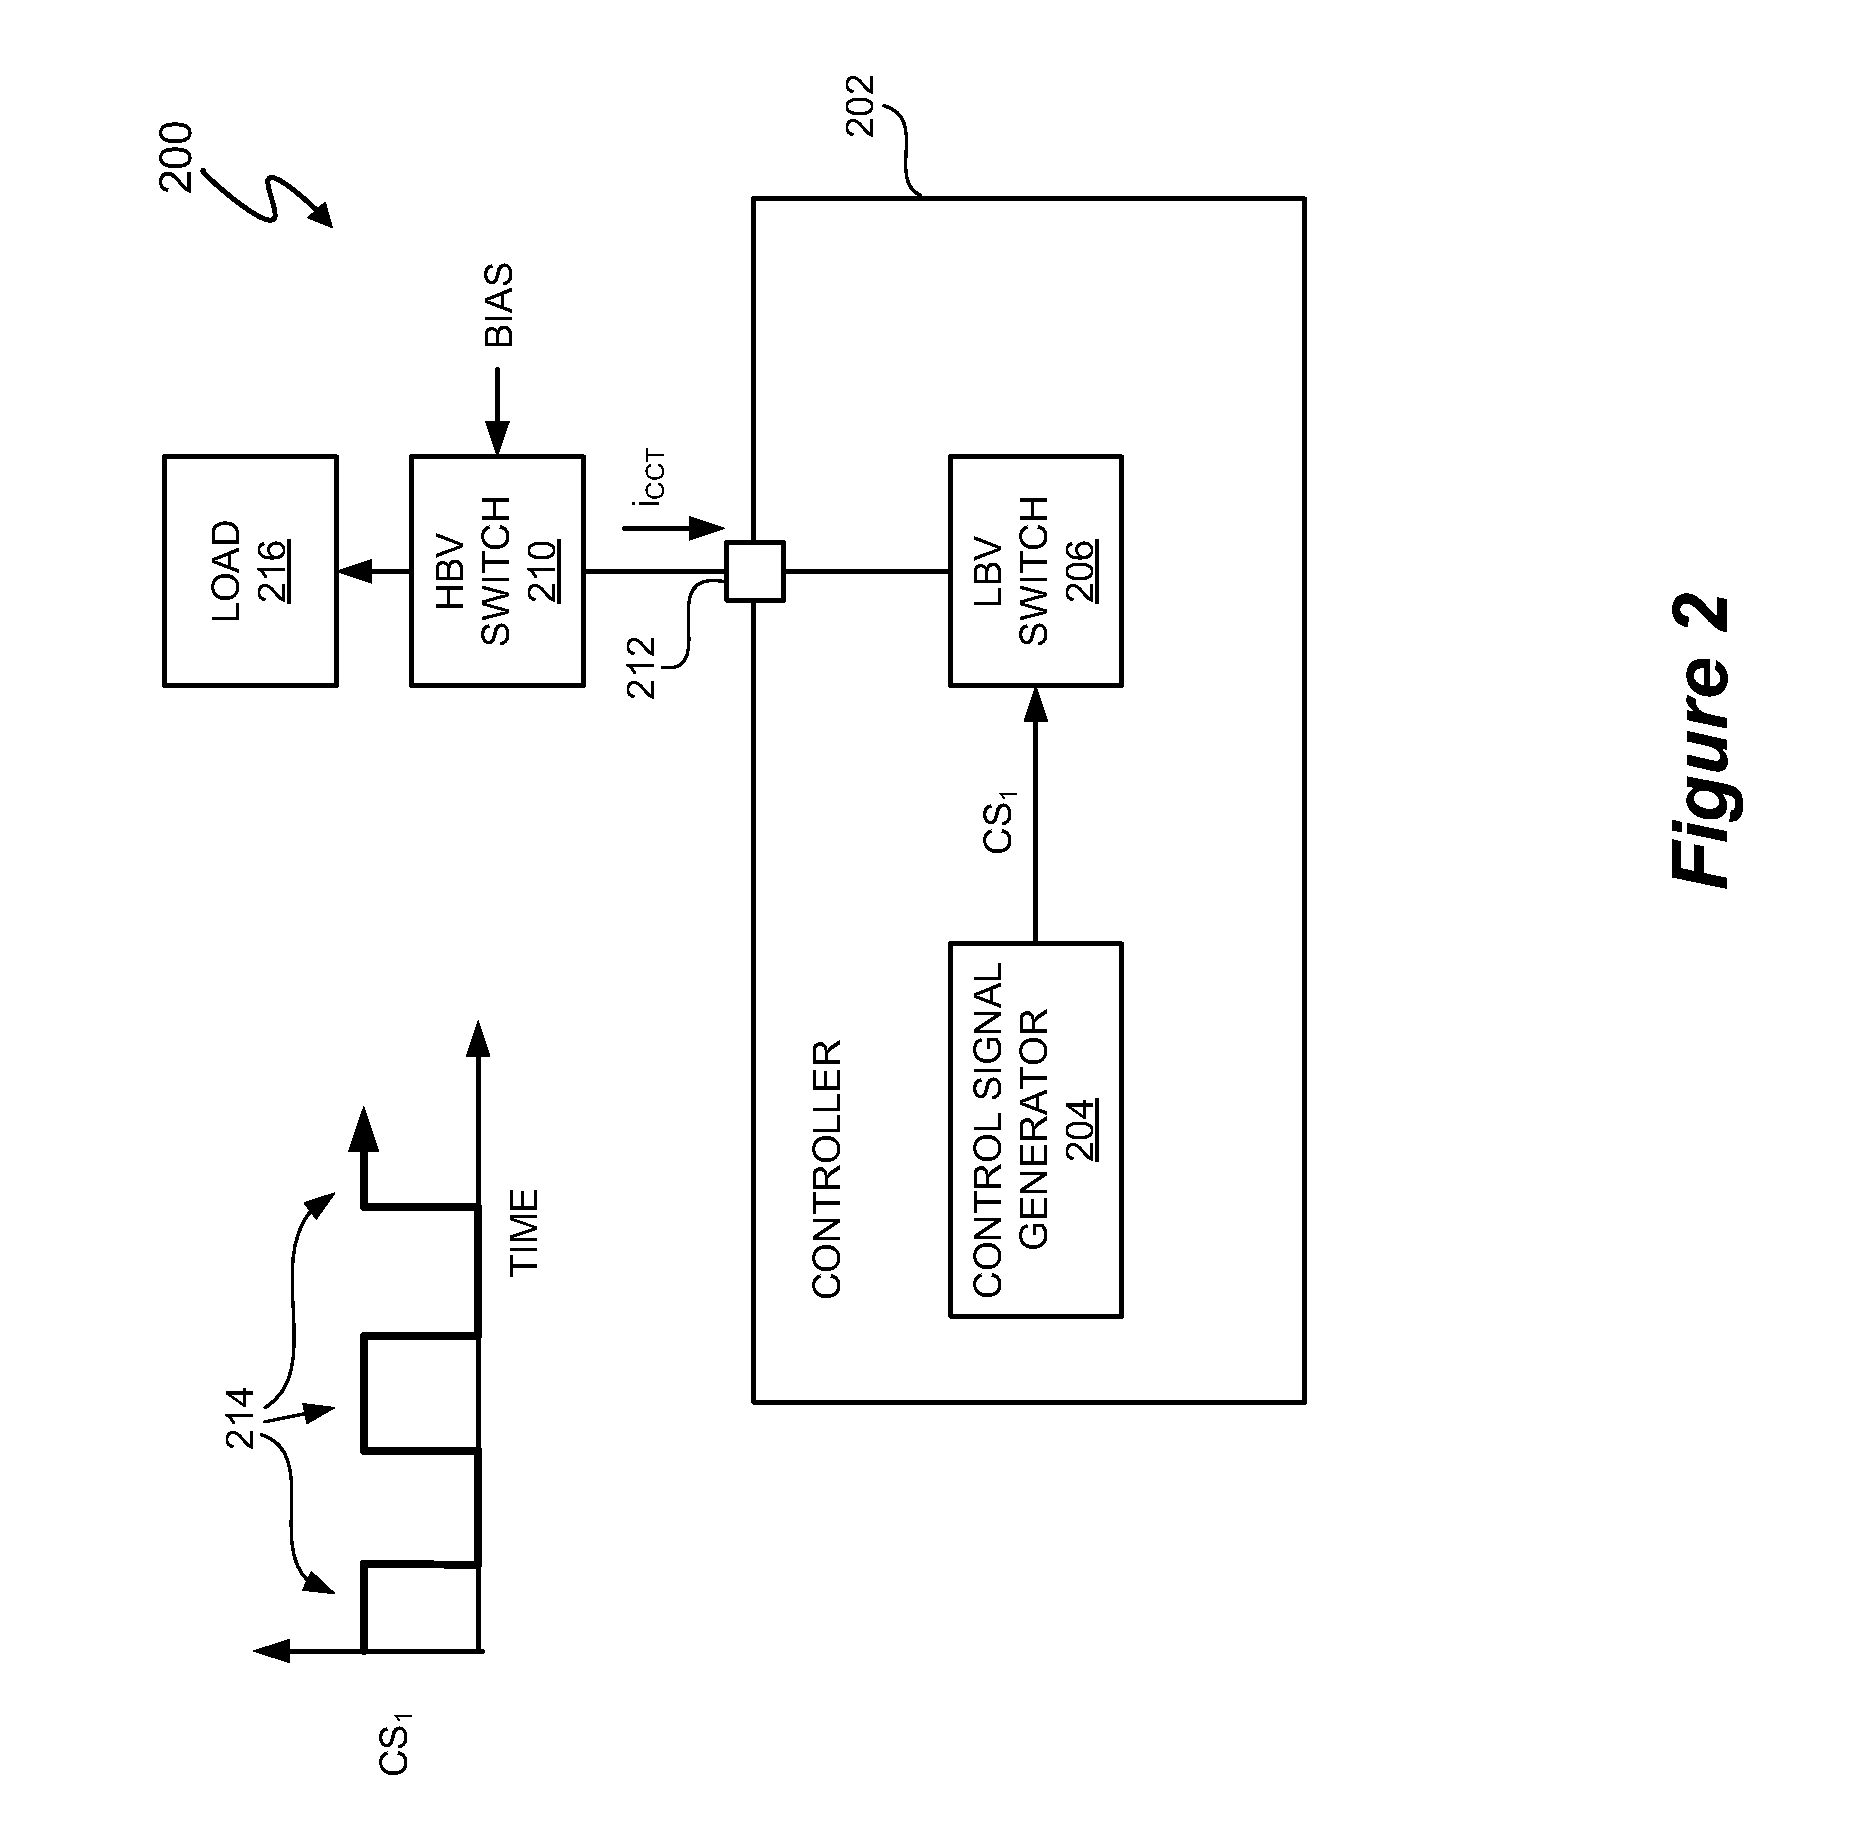 Cascode configured switching using at least one low breakdown voltage internal, integrated circuit switch to control at least one high breakdown voltage external switch